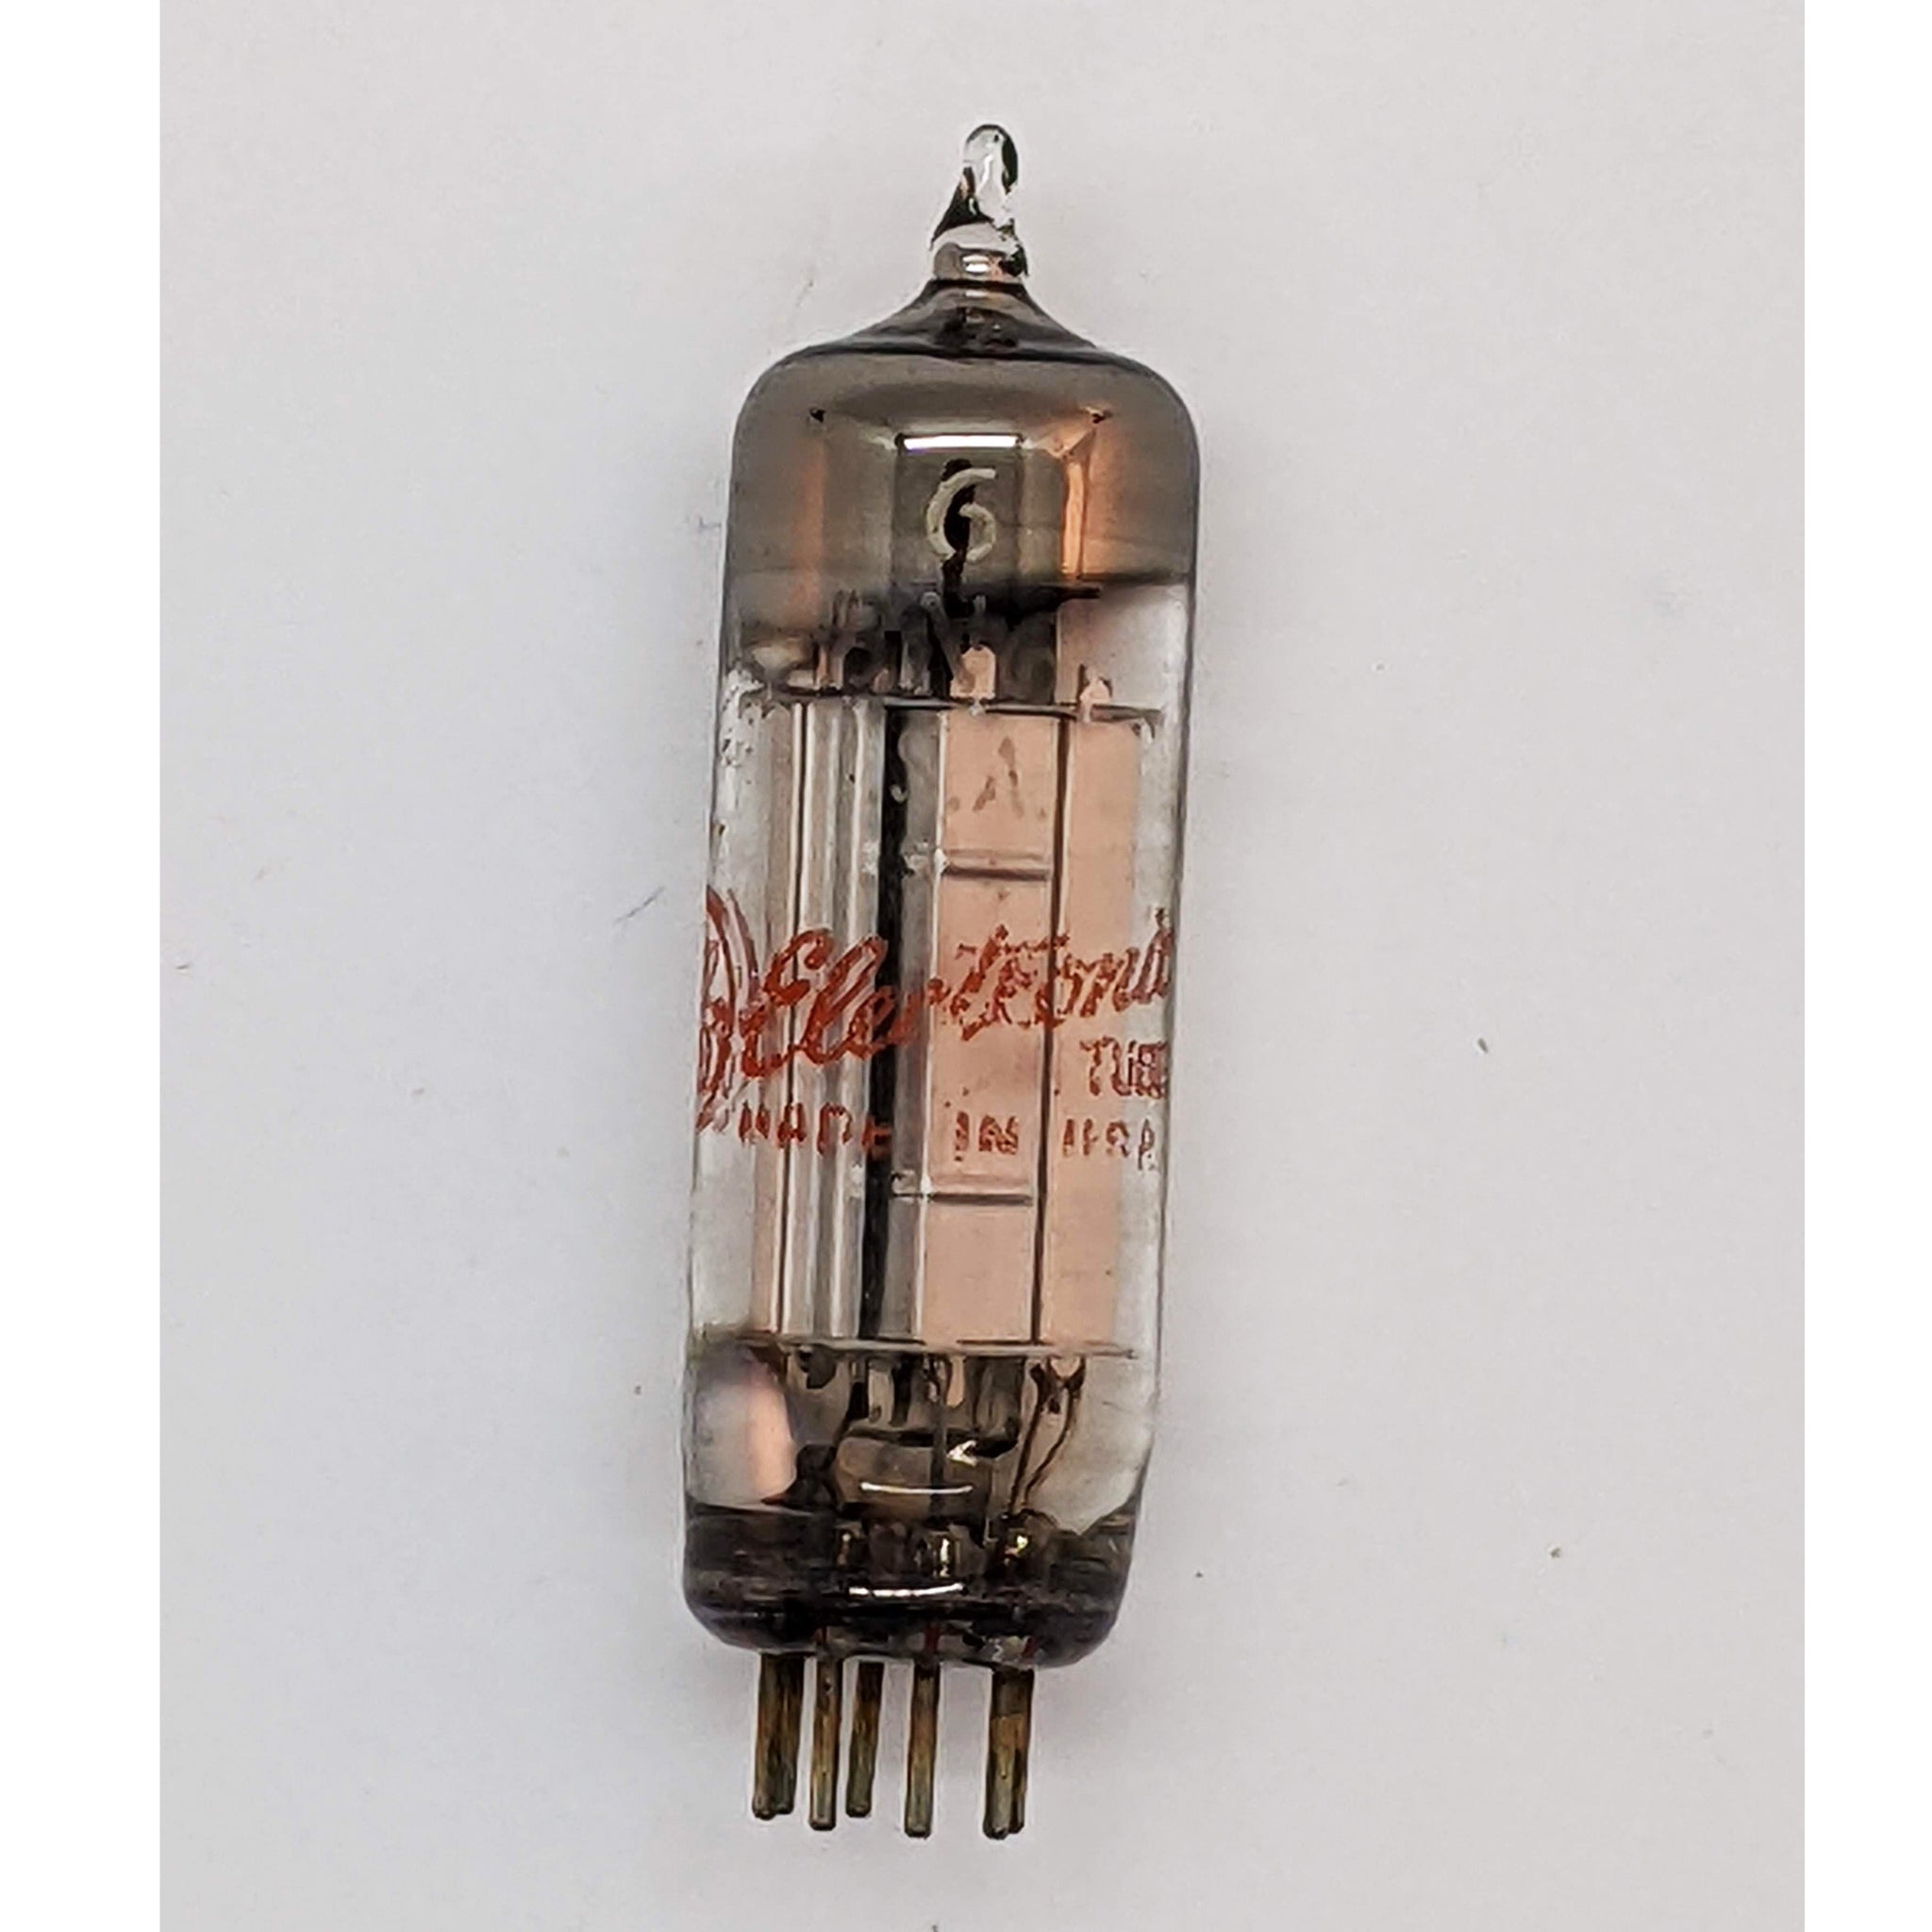 6BN6 Vacuum Tube, Tested Good, Ships Quick From Mississippi